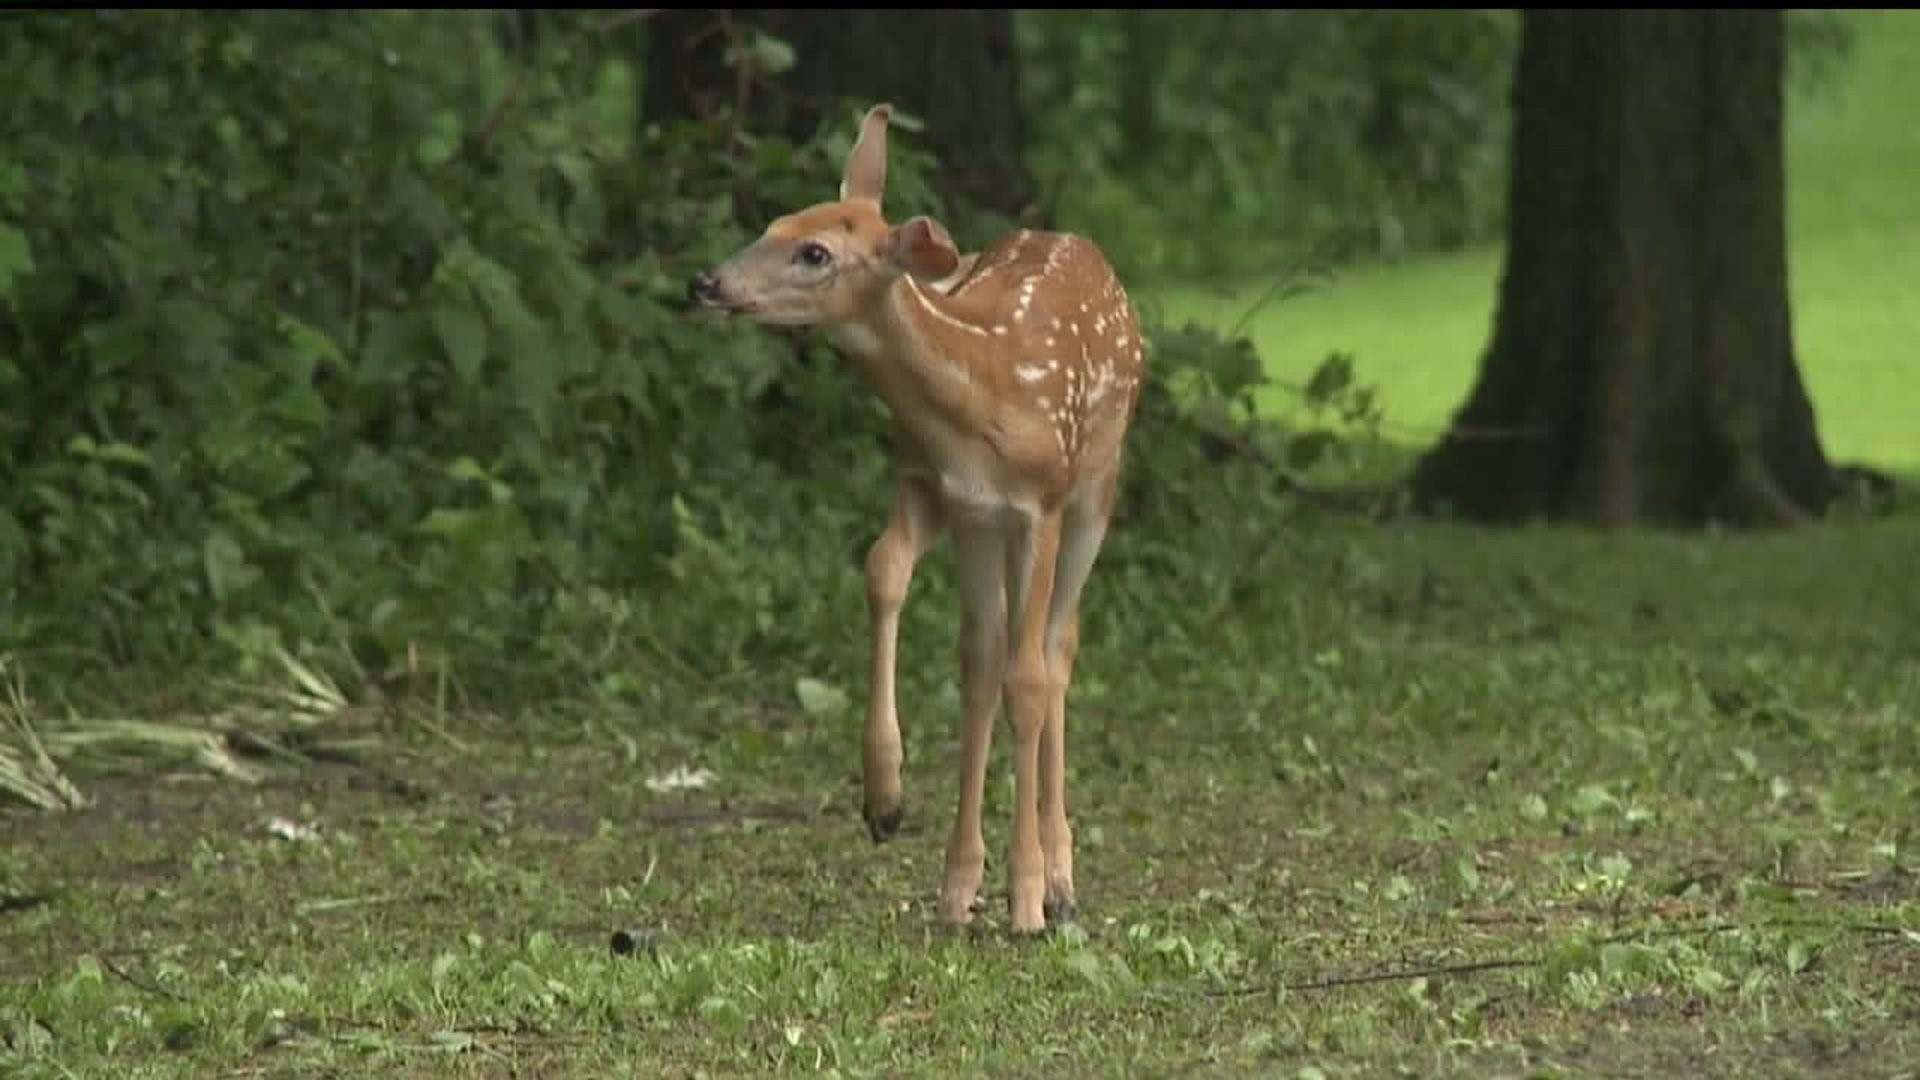 Iowa ranks 5th for deer crashes